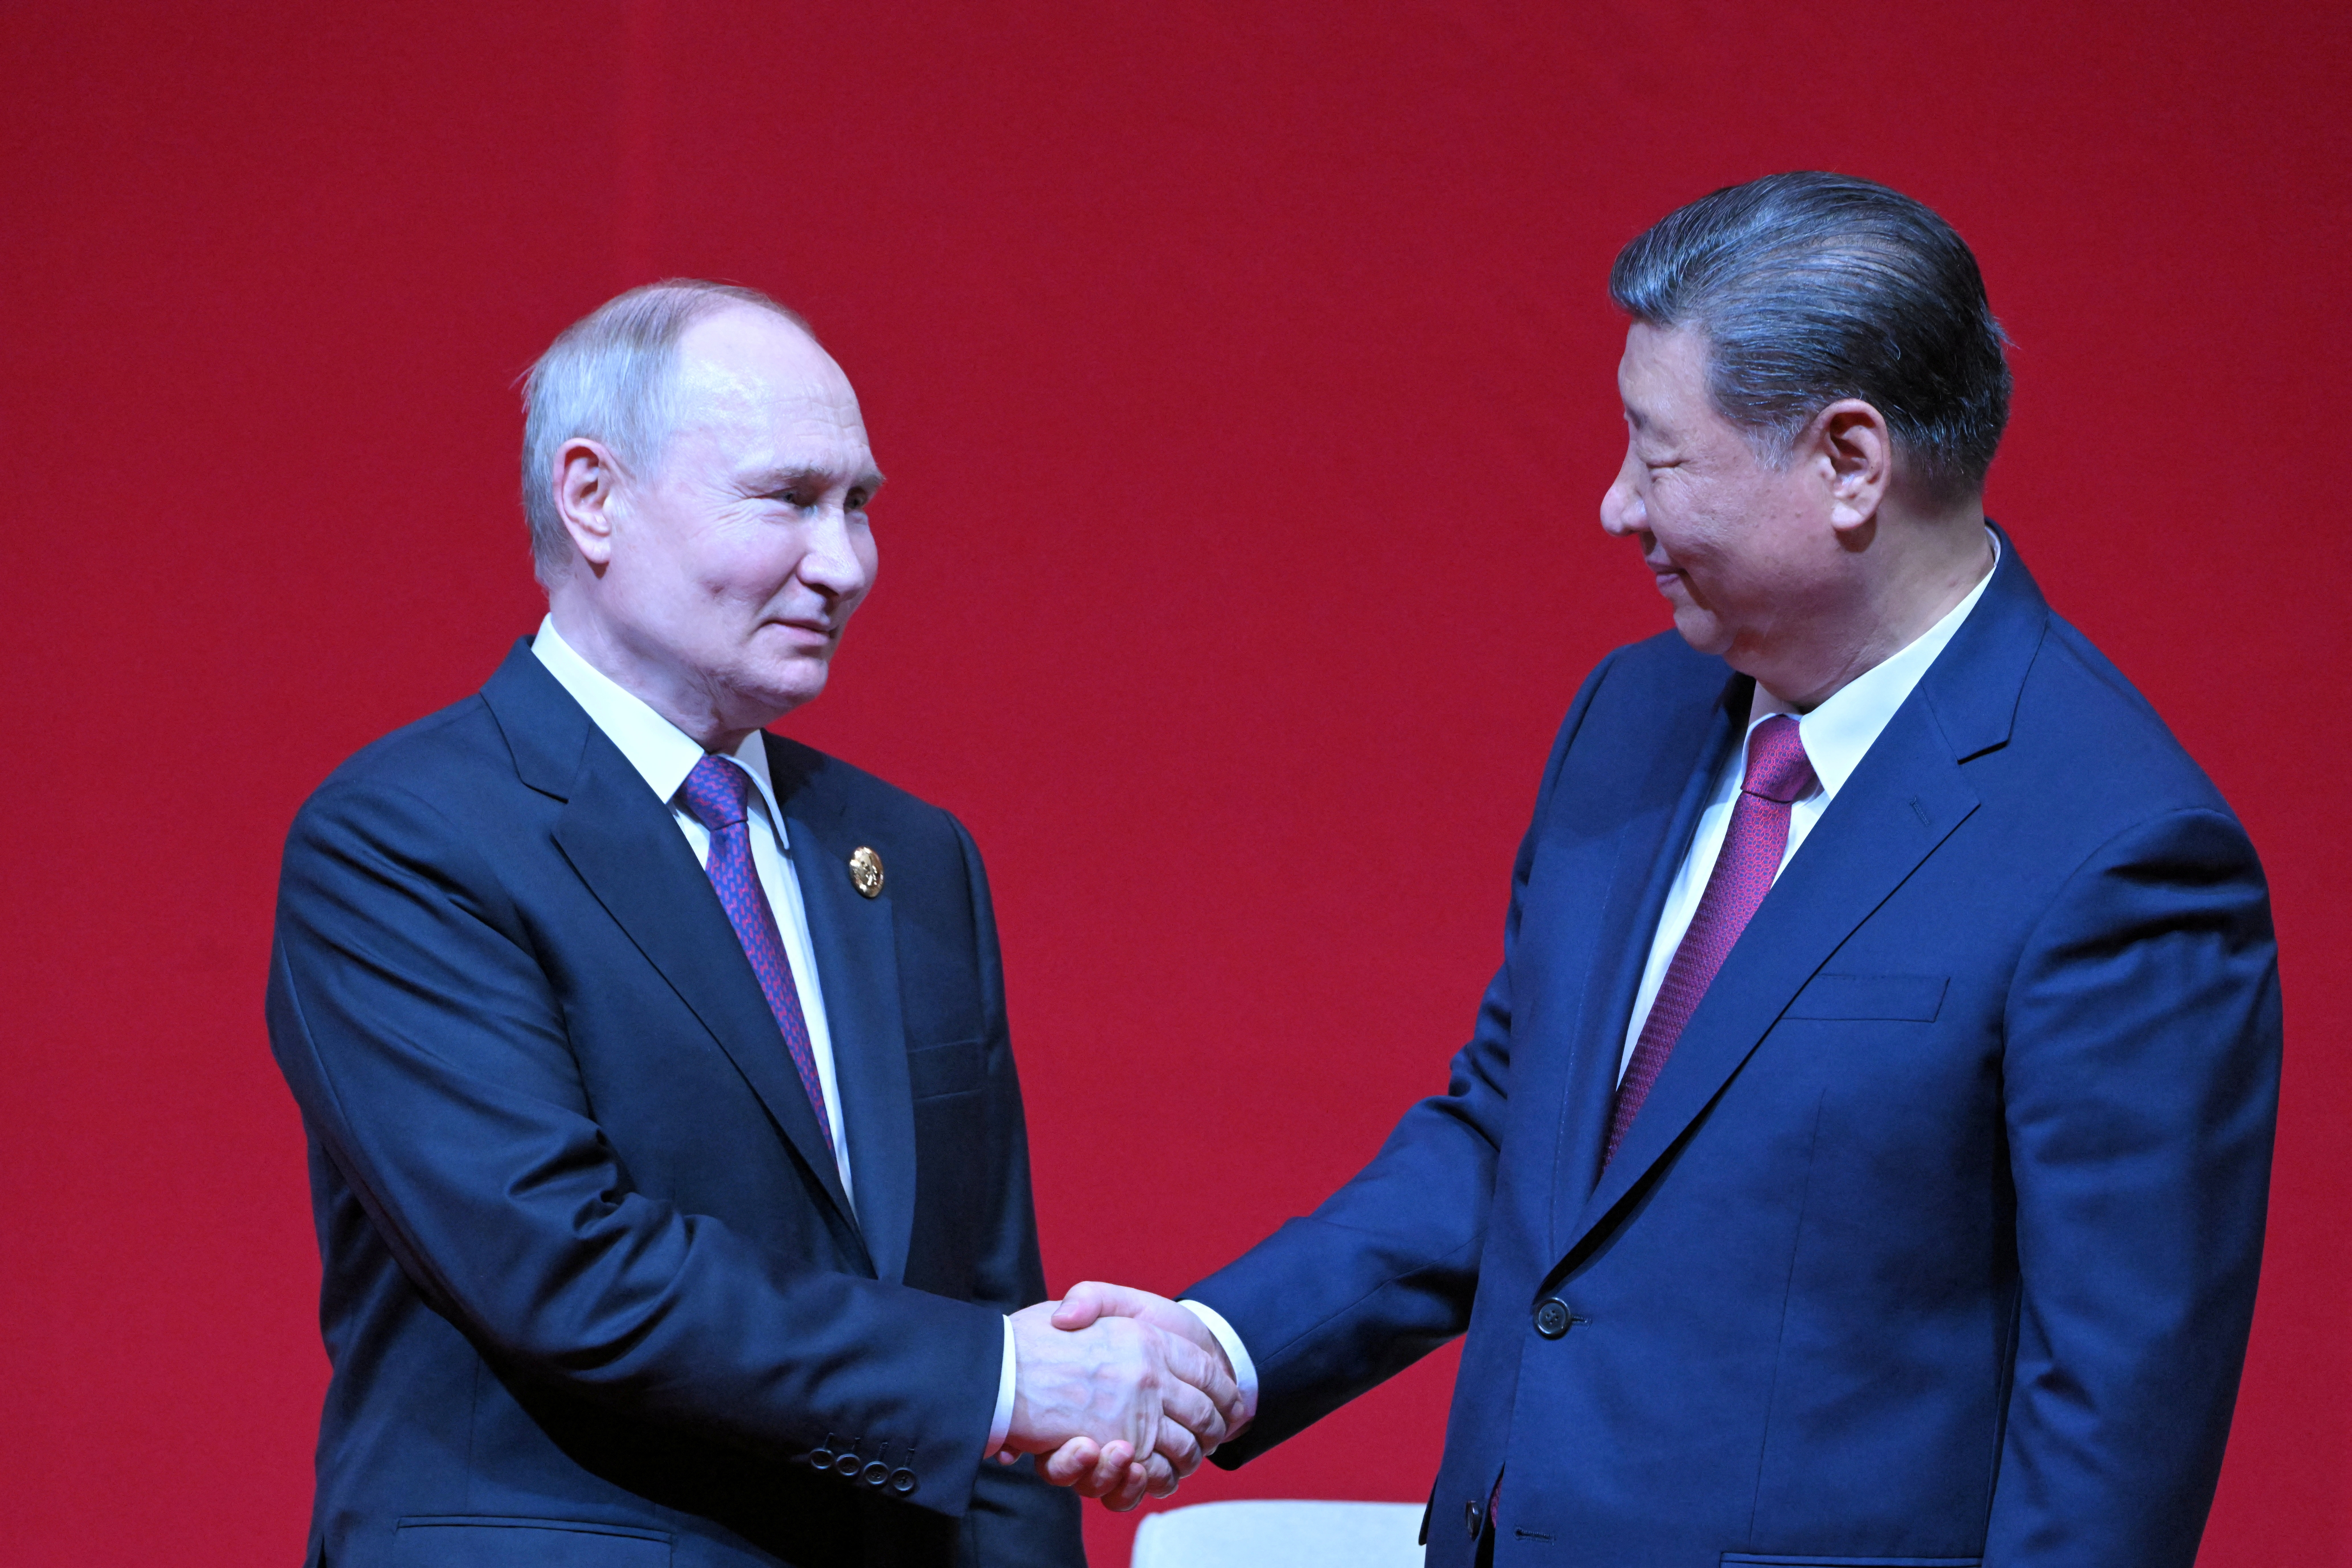 Xi, Putin attend gala event celebrating 75th anniversary of China-Russia relations in Beijing